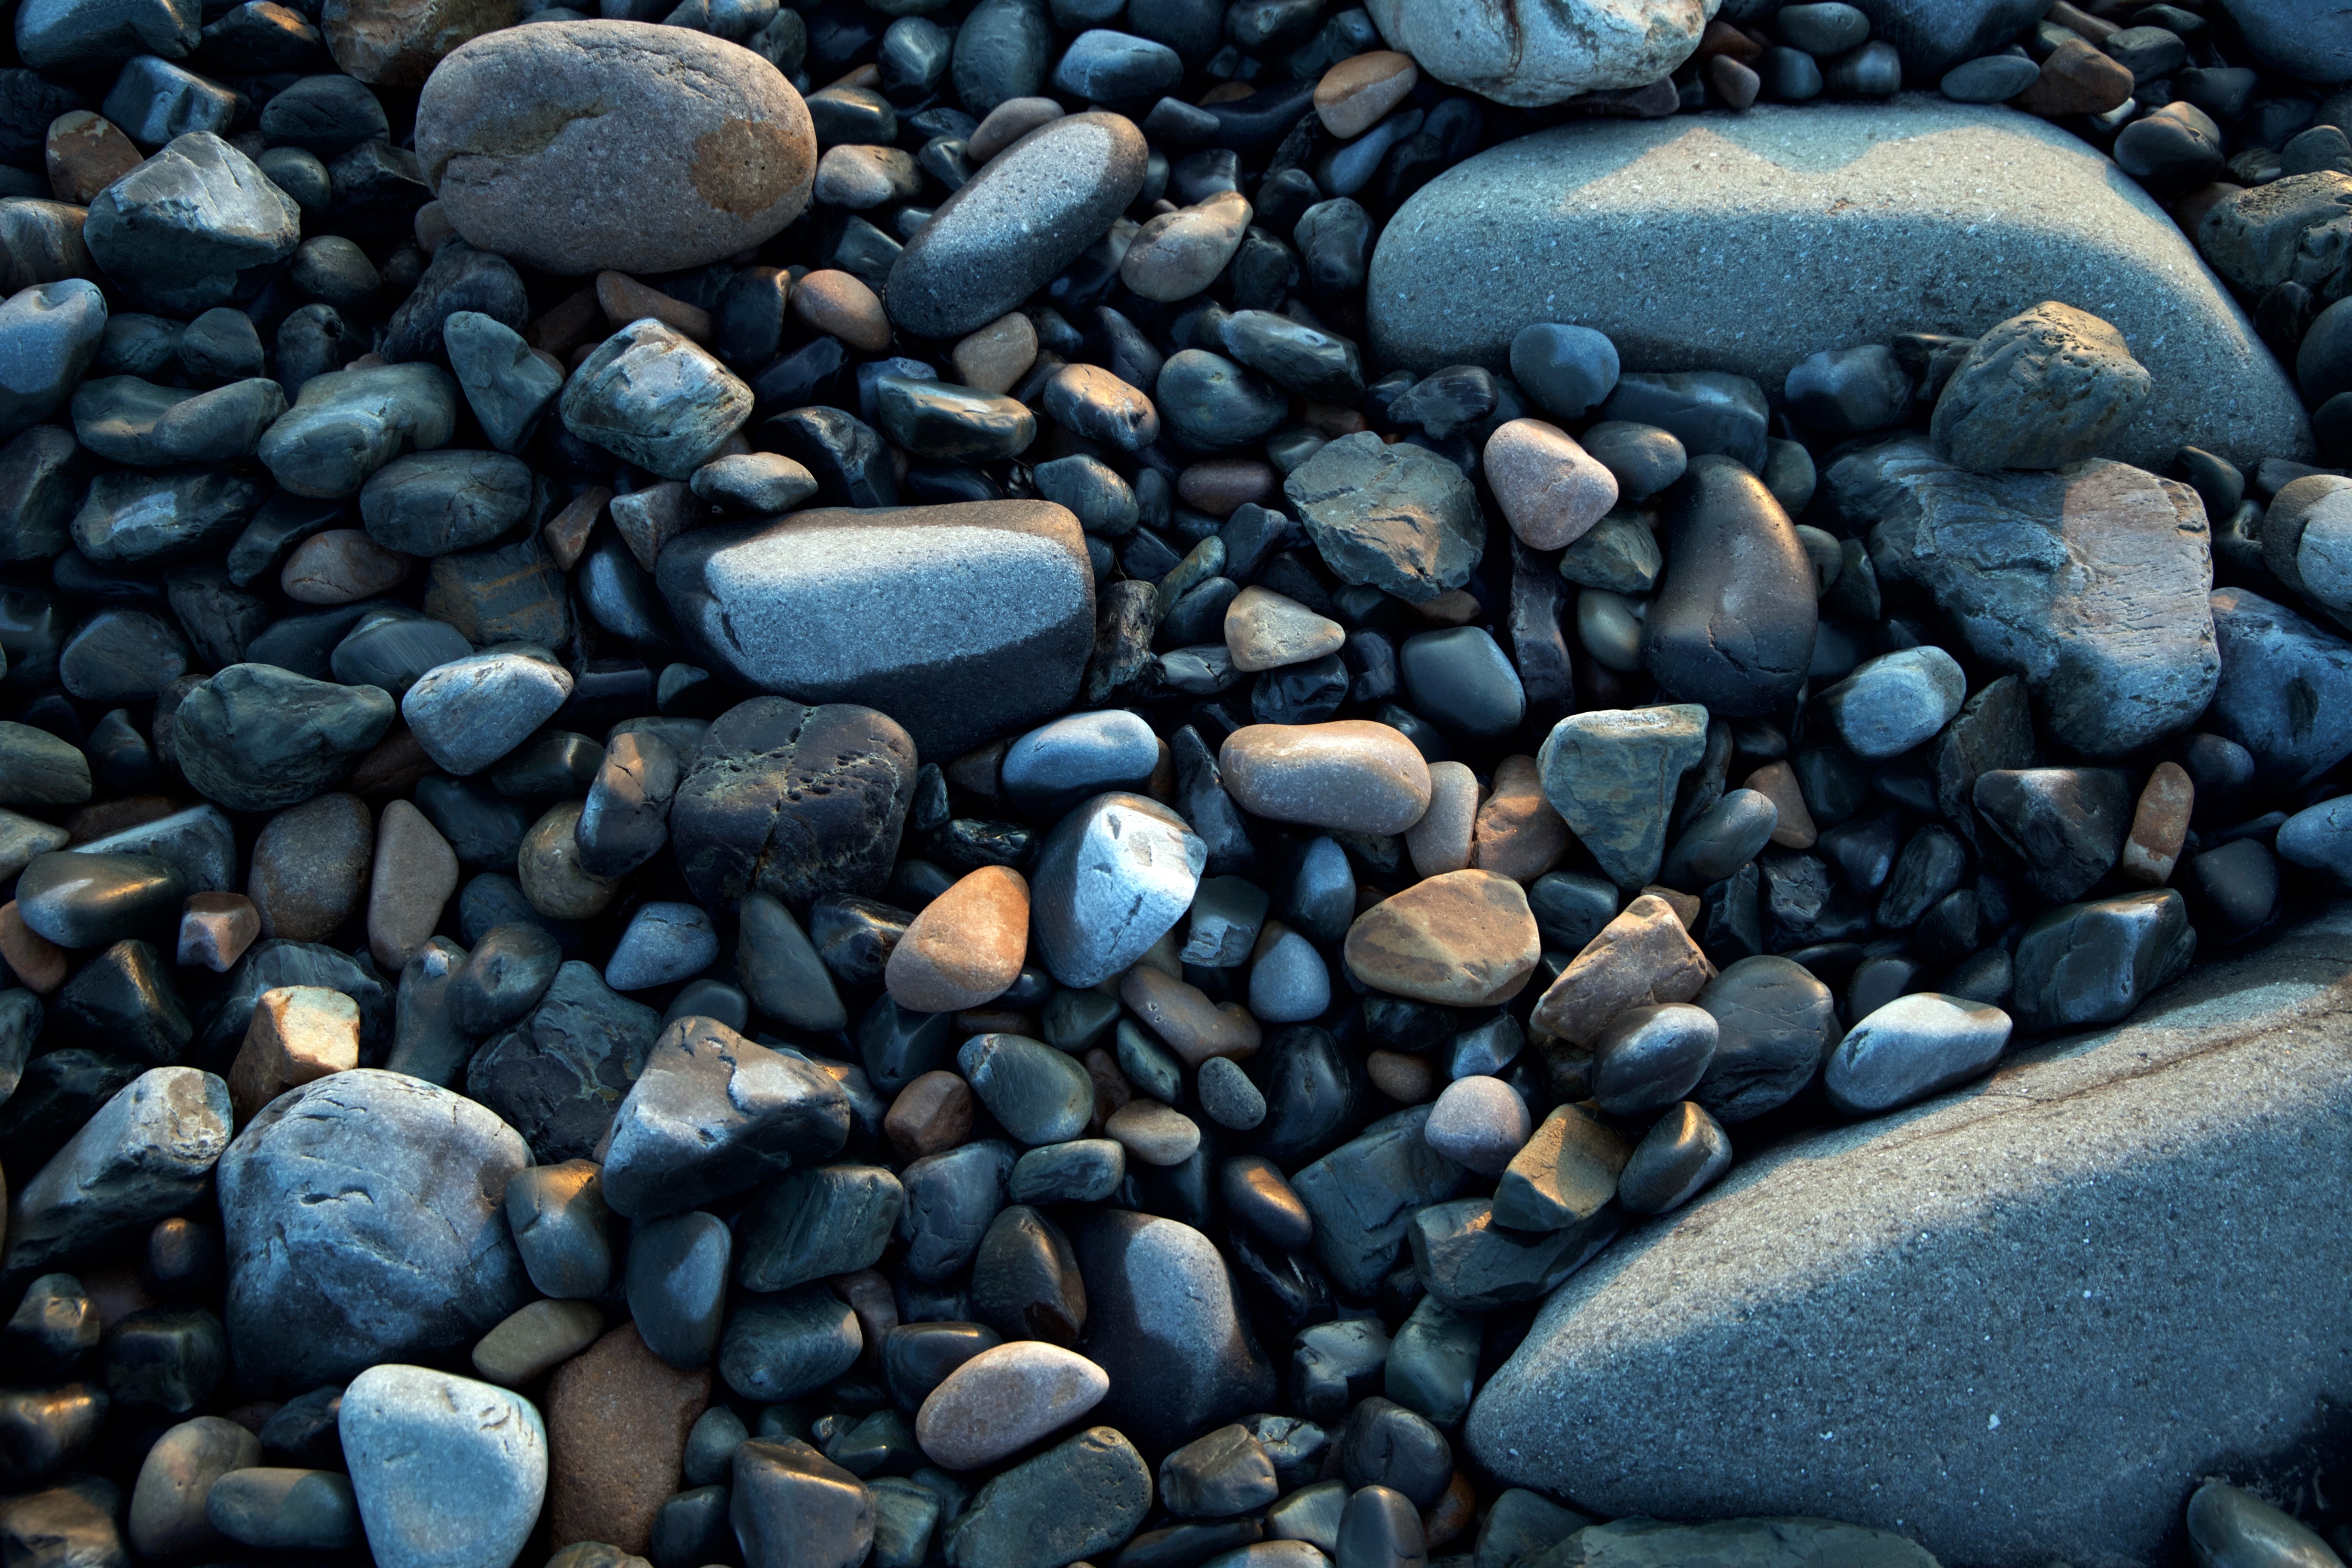 93930 download wallpaper pebbles, form, sea stones, nature, forms, seastones screensavers and pictures for free